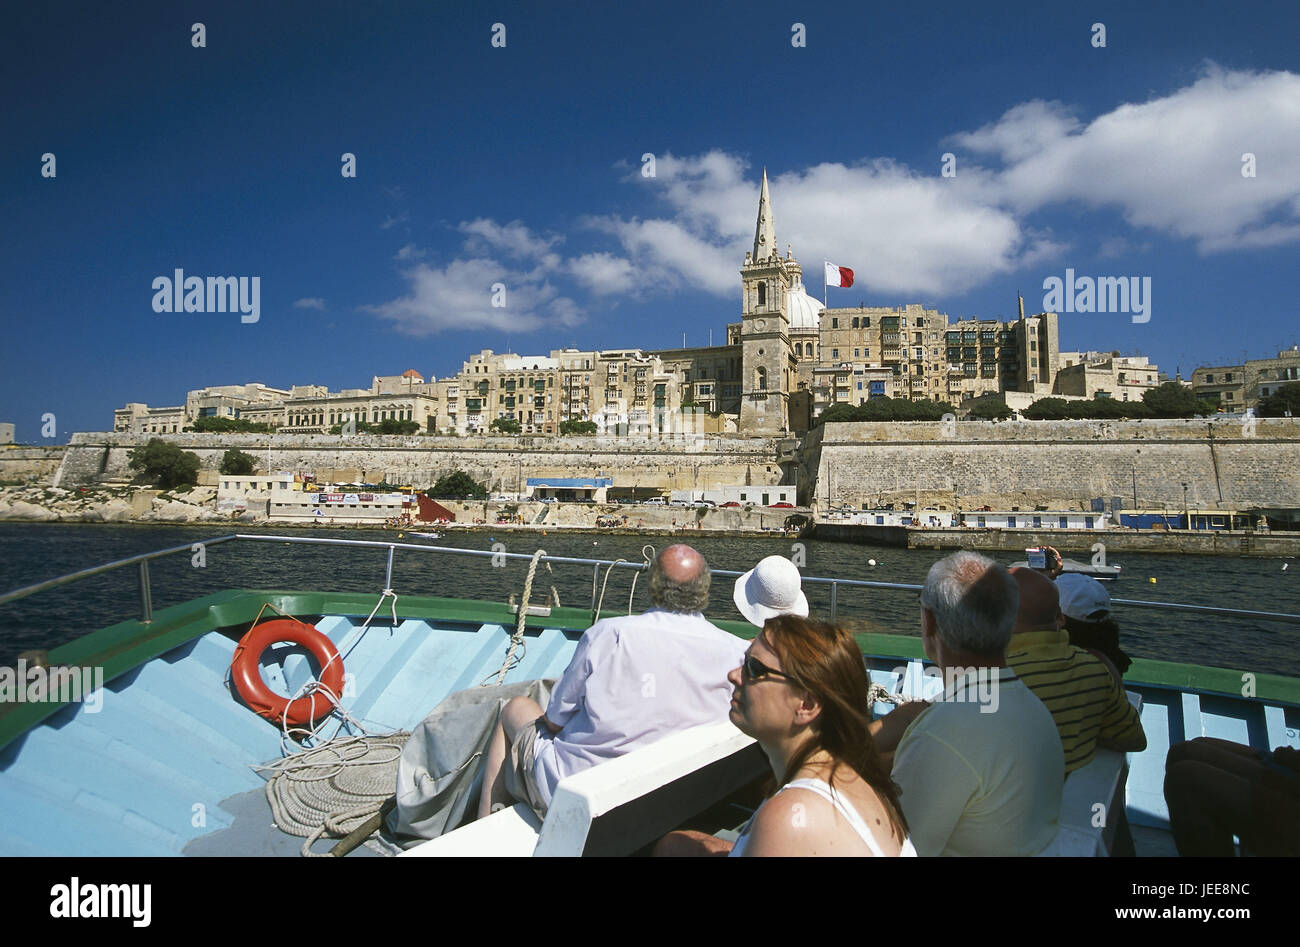 Island Malta, Marsamxett Harbour, boat, tourist, view Valletta, St. Paul's cathedral, St. Salvatore of bastion, no model release, Maltese islands, Mediterranean island, coast, peninsula Sciberras, capital, town, town view, Old Town, UNESCO-world cultural heritage, structures historically, fortress, sacred construction, church, in Anglican way, places of interest, excursion boat, harbour boat tour, boot round trip, boot tour, person, sea, the Mediterranean Sea, Stock Photo